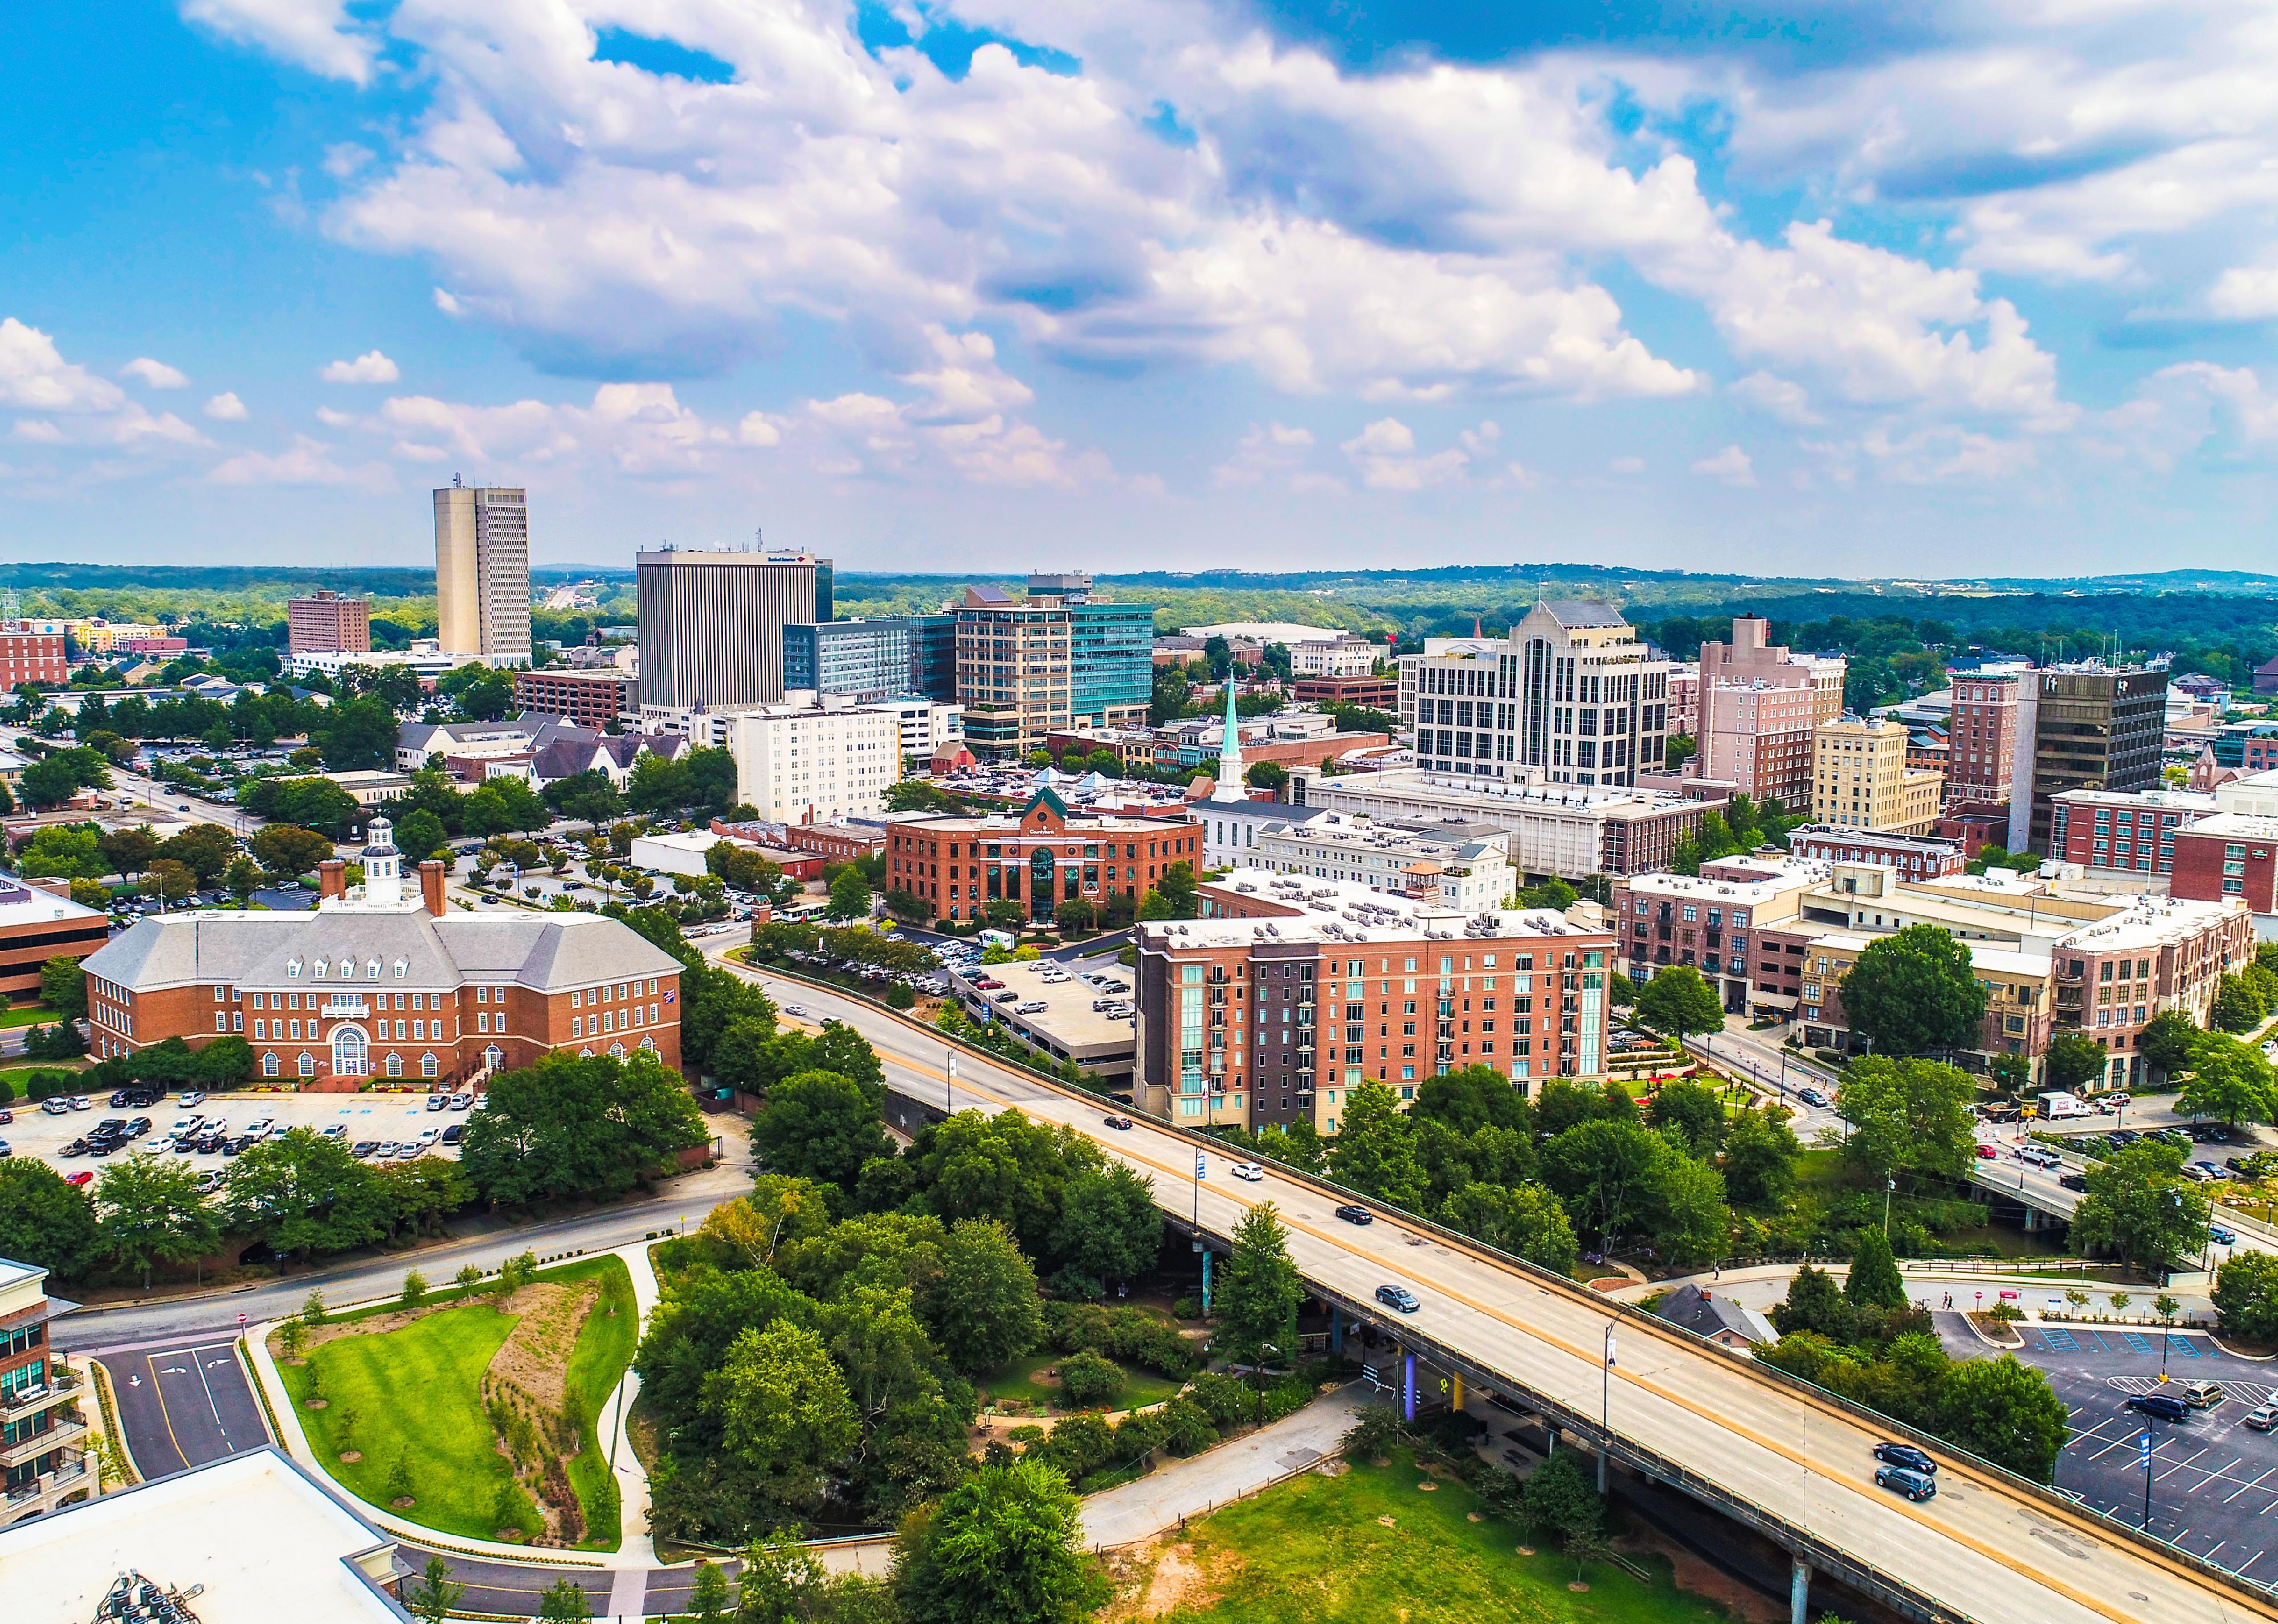 Drone of the Downtown Greenville skyline.